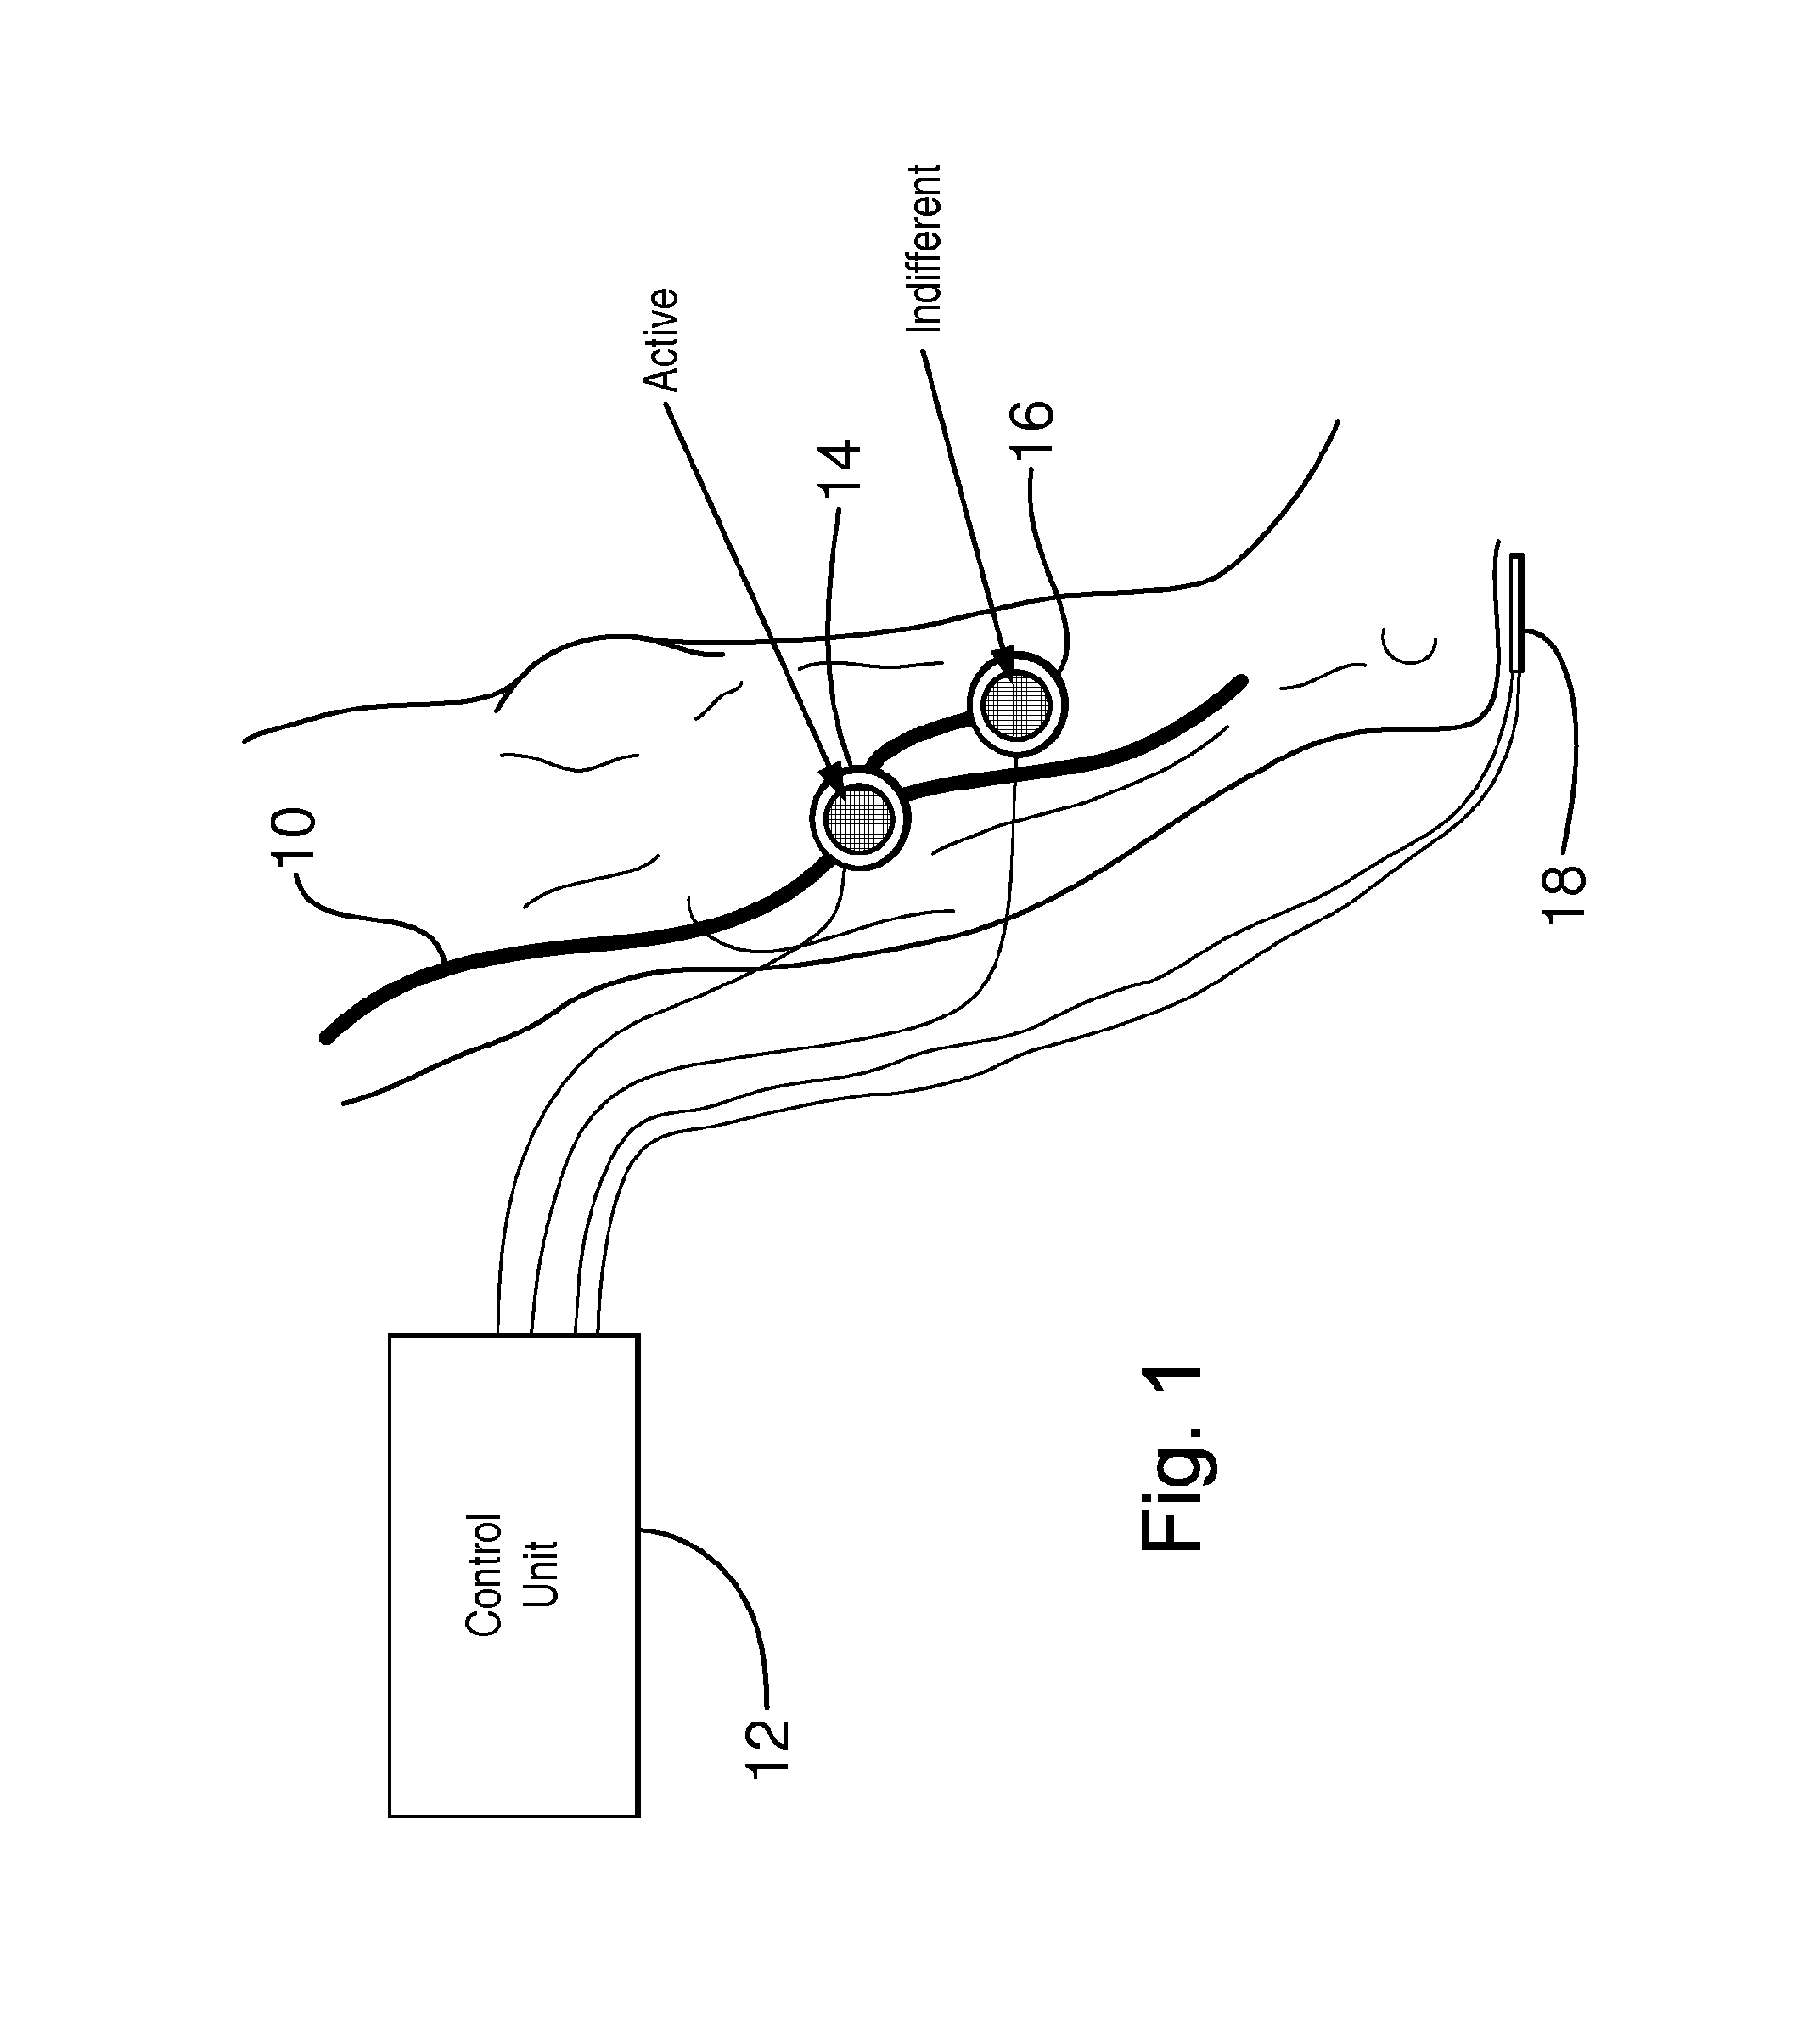 Apparatus for functional electrical stimulation of the body